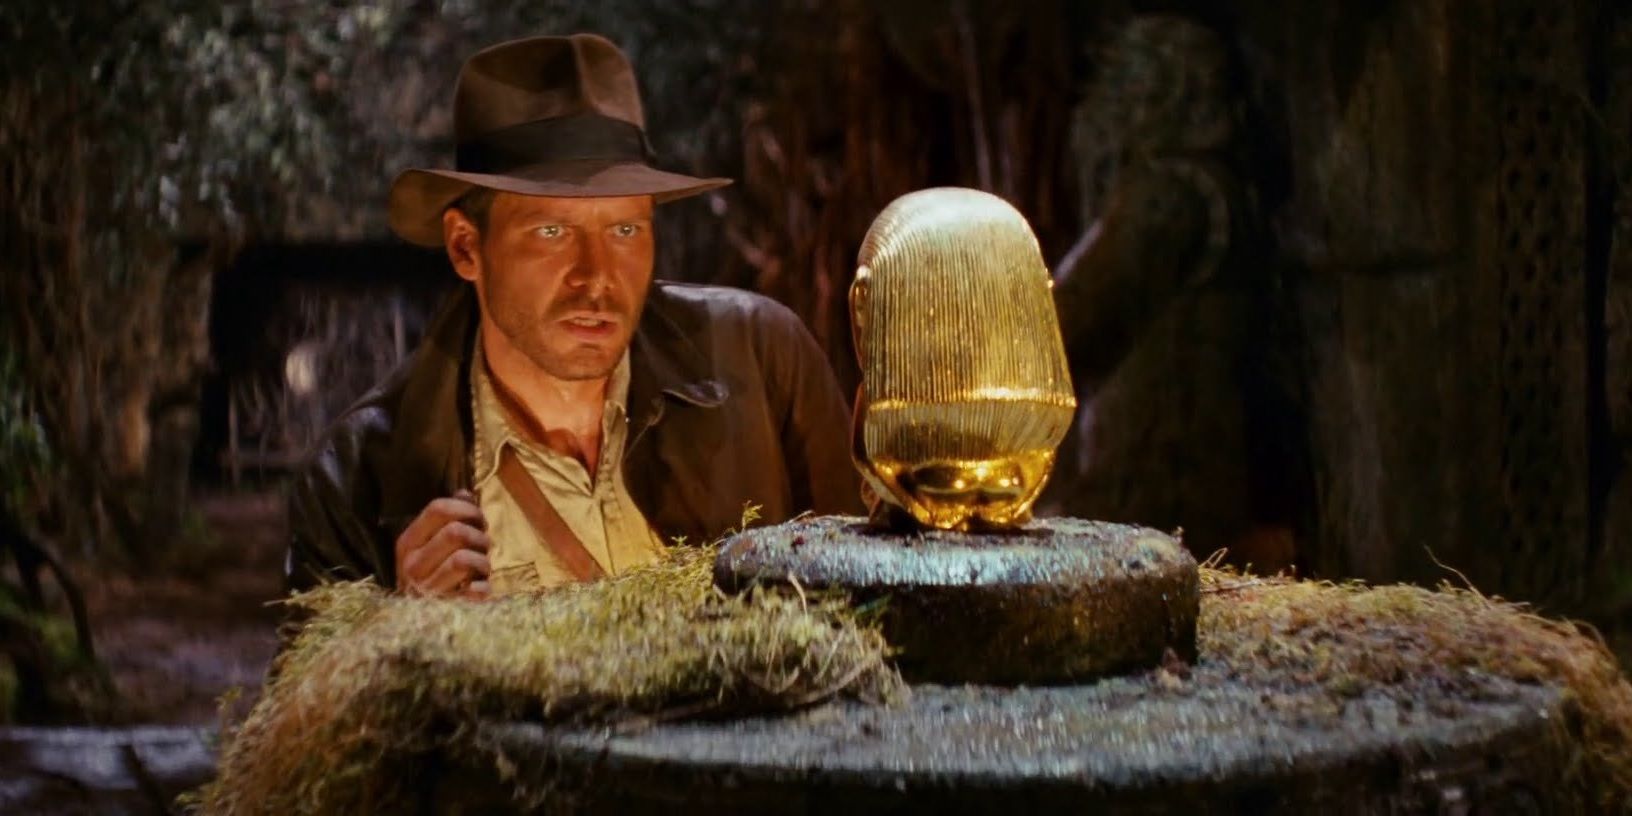 Indy taking the golden idol from the temple in Raiders of the Lost Ark